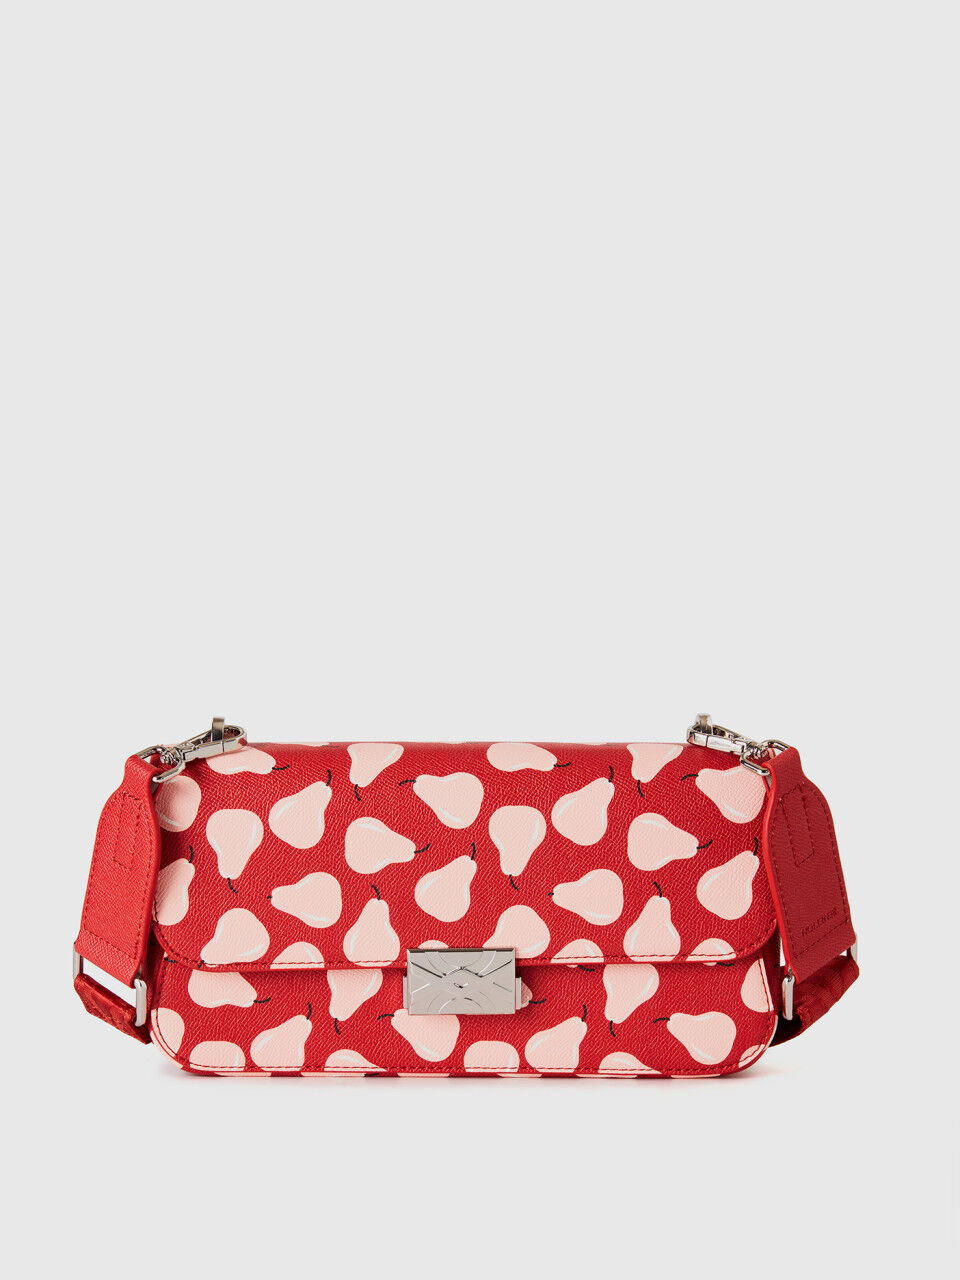 Medium red Be Bag with pears